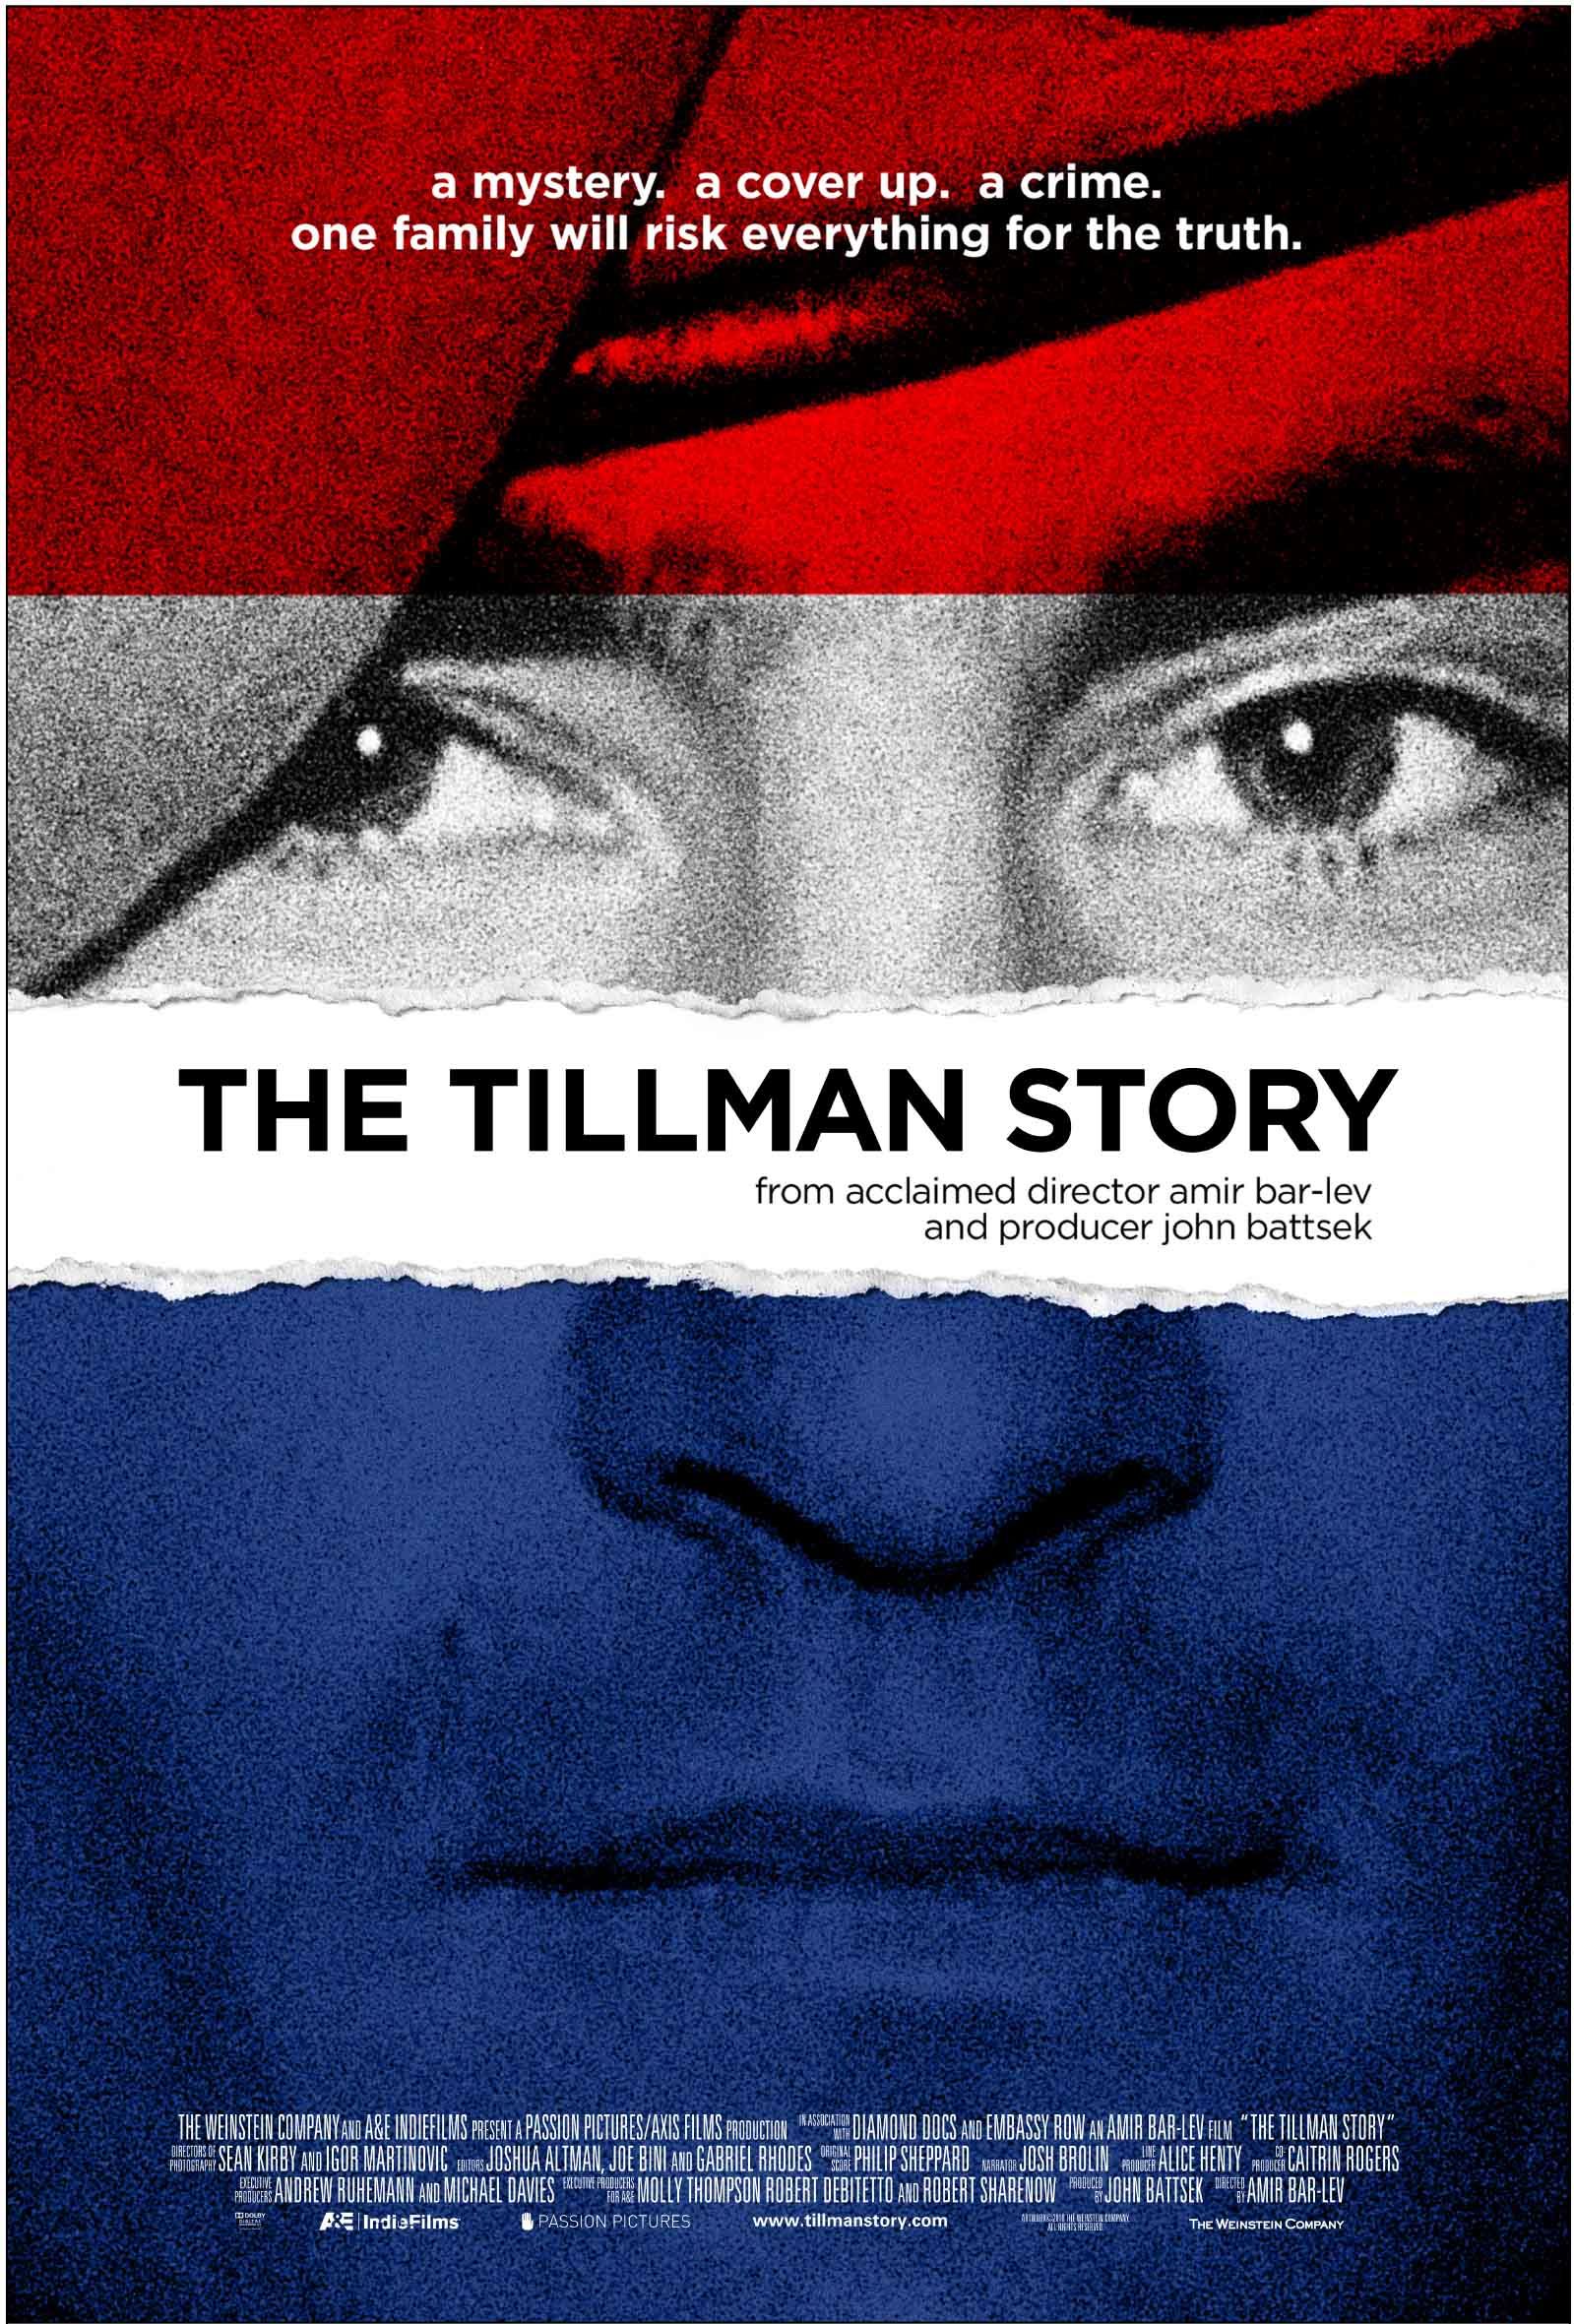 Tillman Story' director compelled by hero's tale